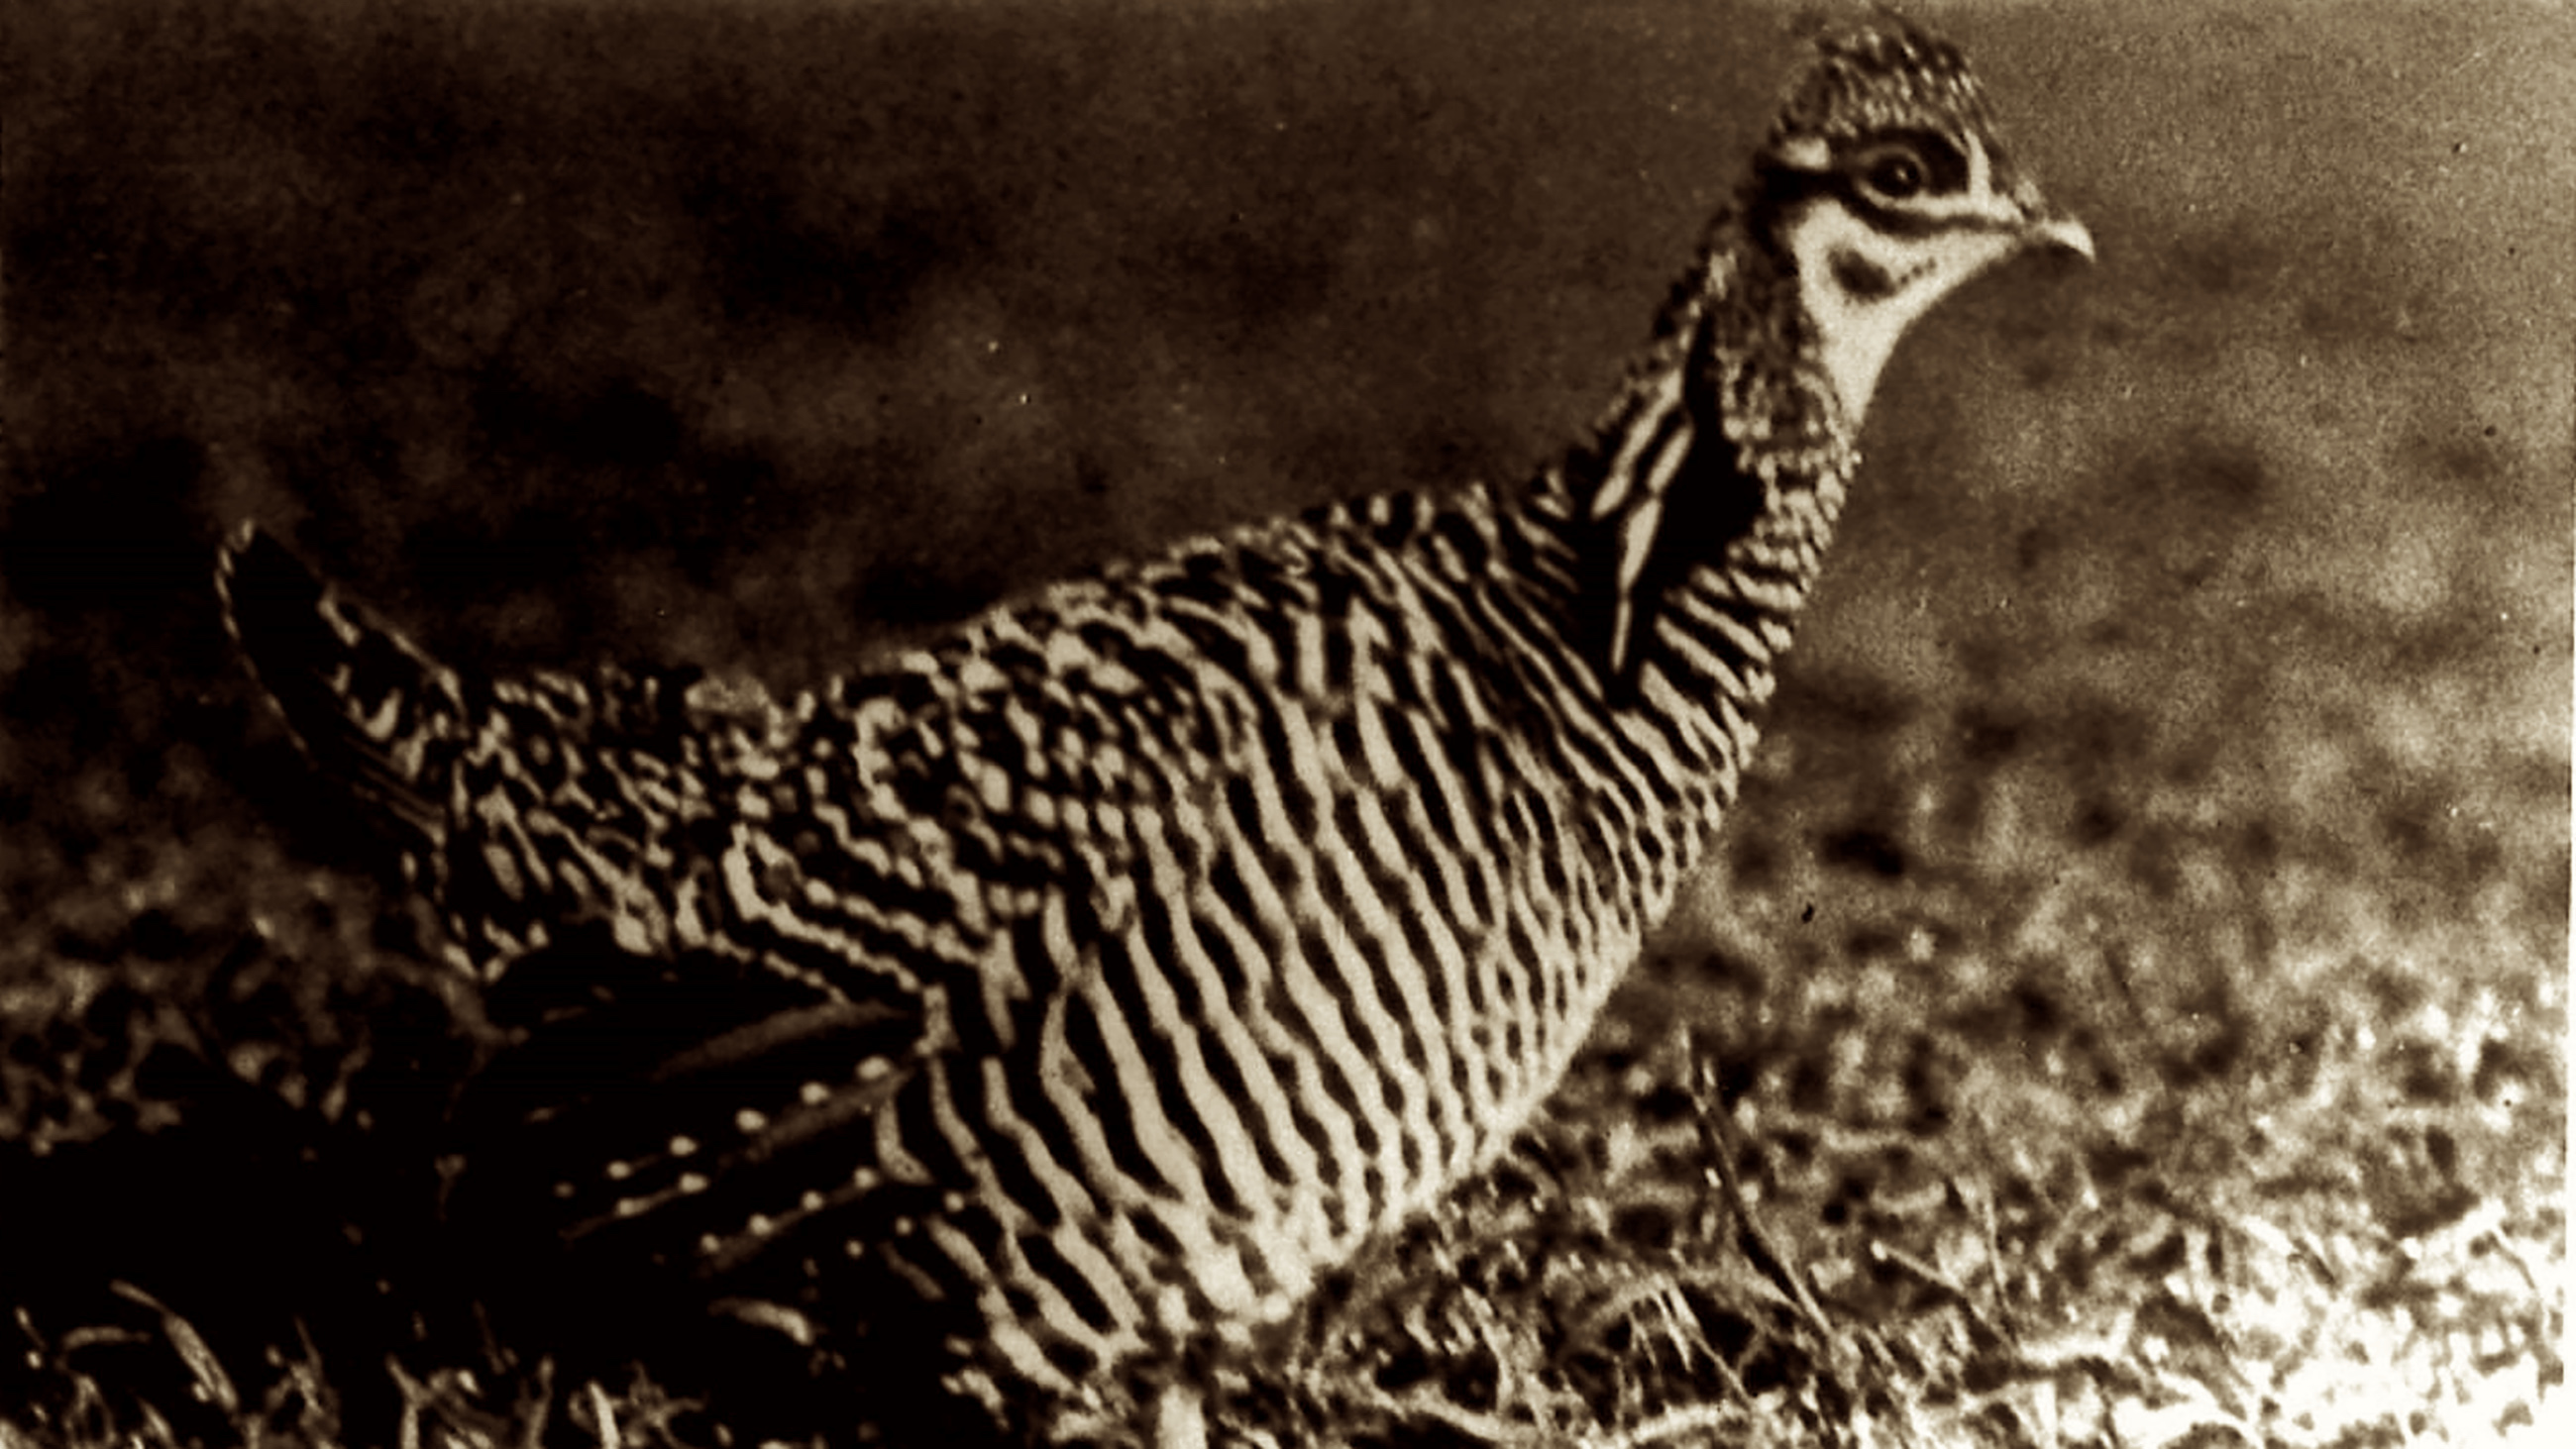 The heath hen was last seen on Martha’s Vineyard, off the coast of Cape Cod, in 1932. It might be coming back.